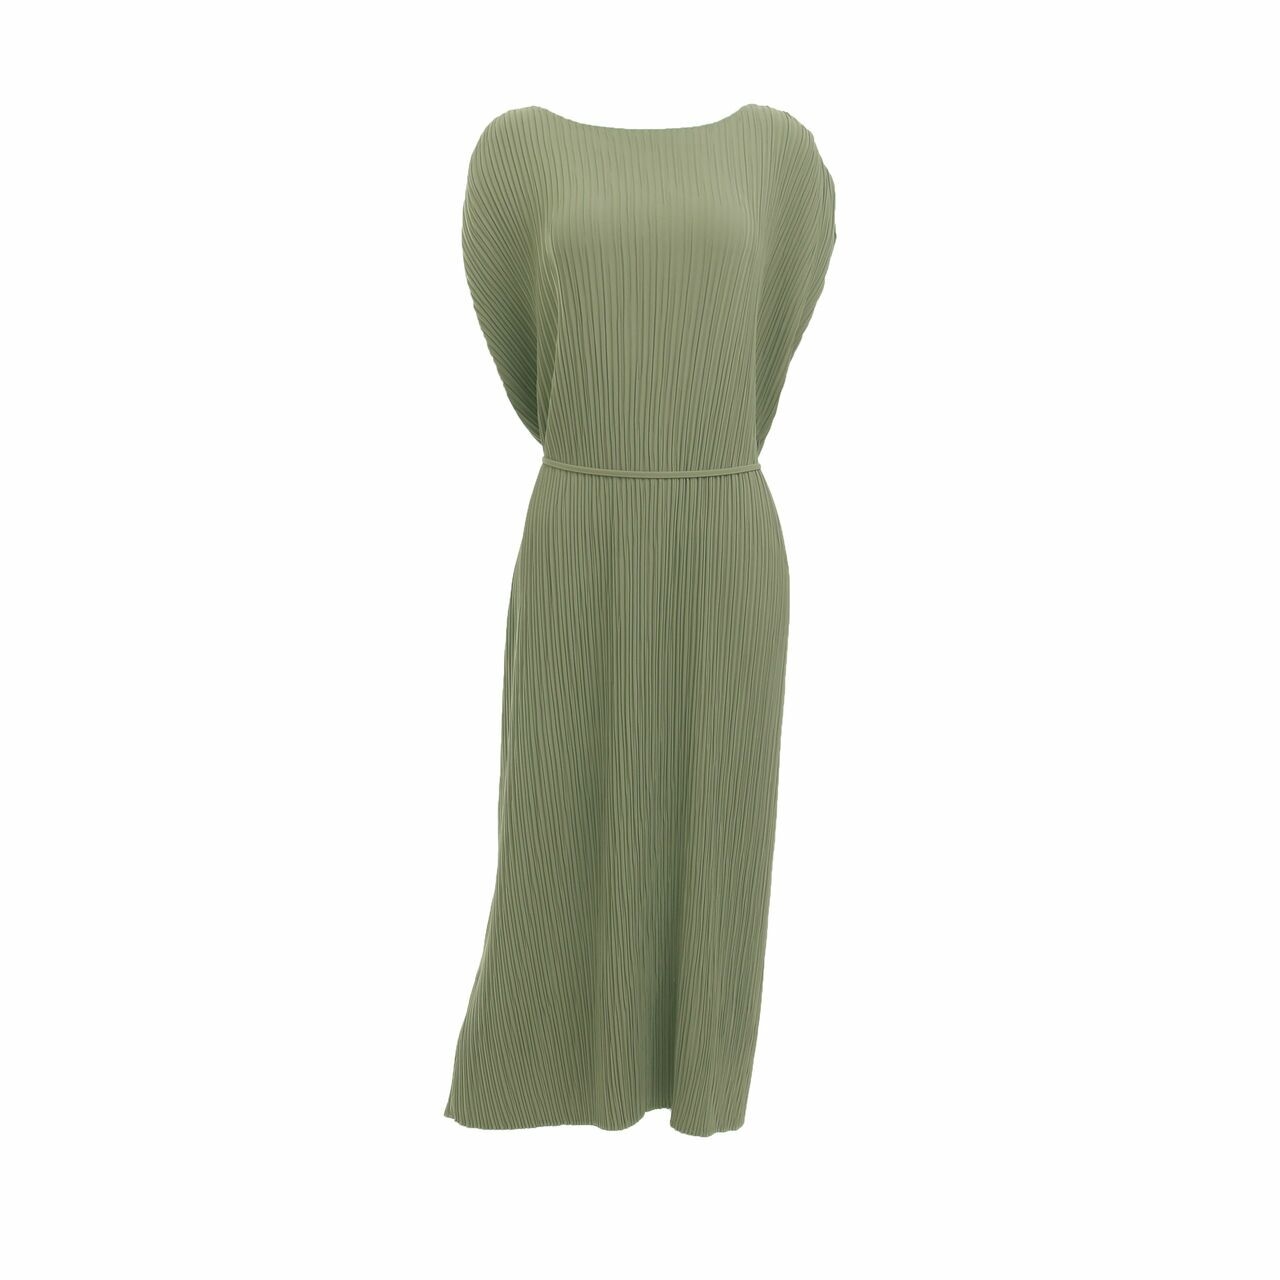 Our Second Nature Green Pleats Midi Dress